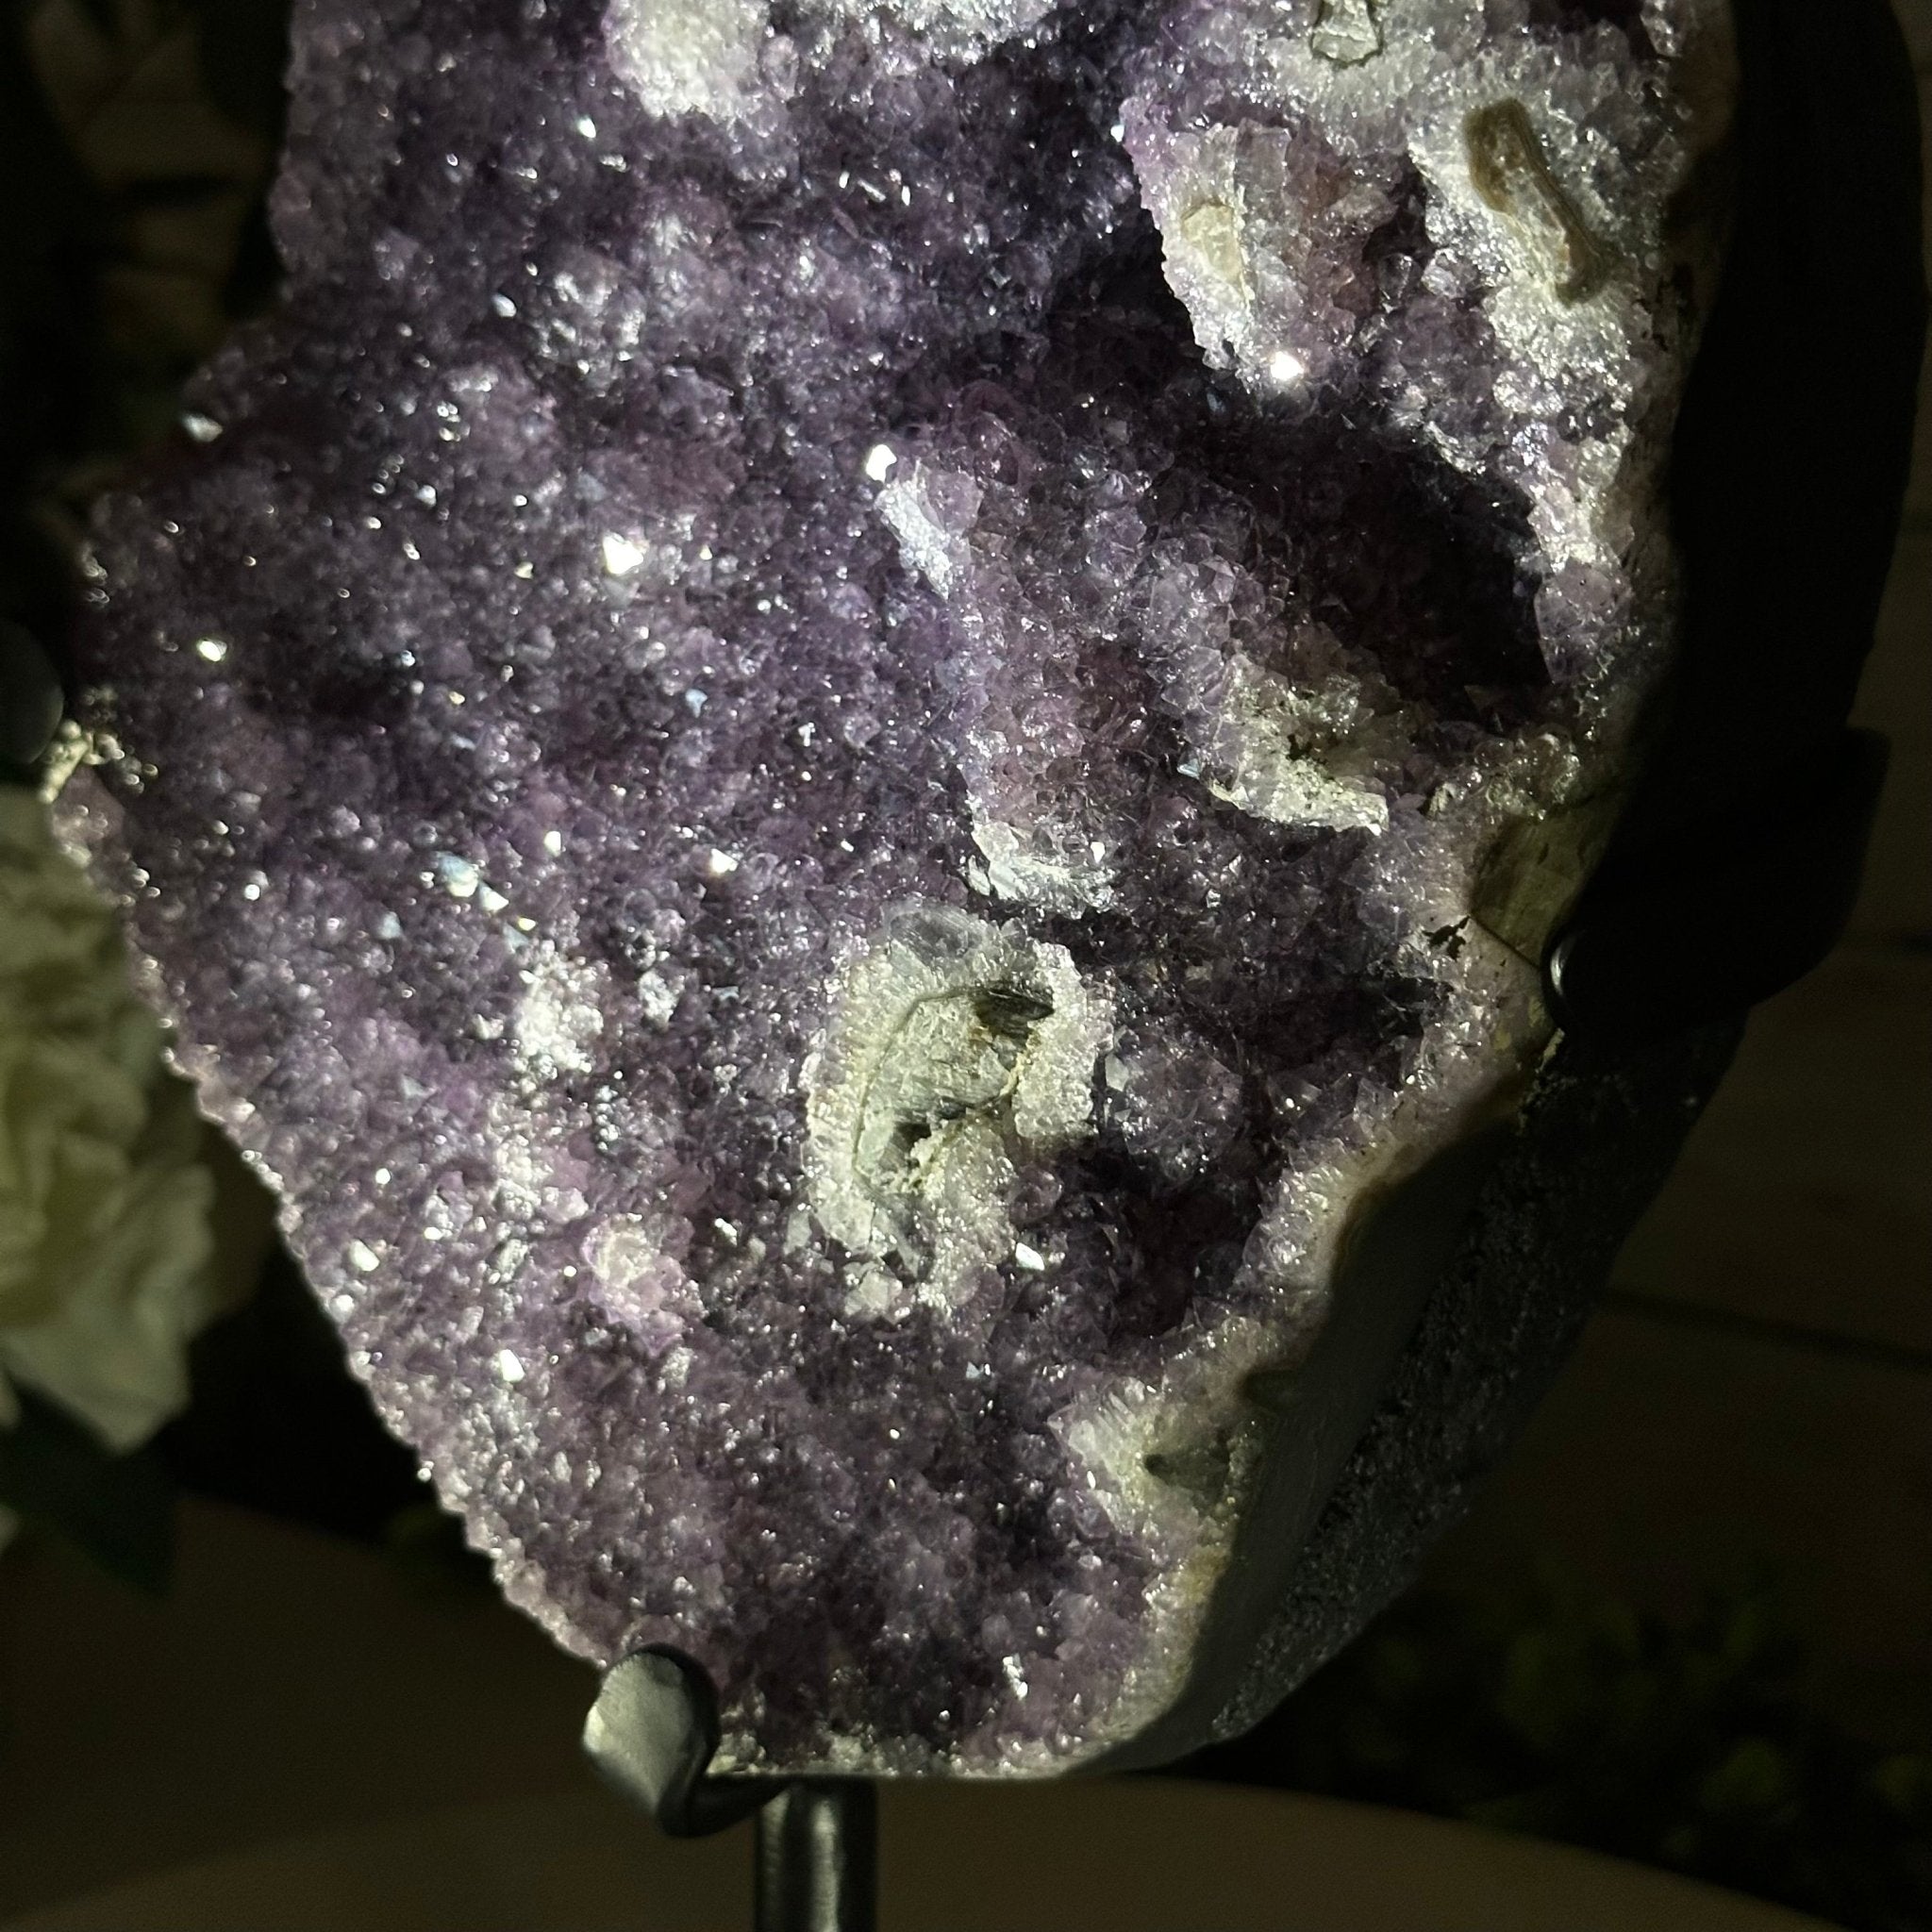 Quality Amethyst Cluster on a Metal Base, 12.7 lbs & 12.75" Tall #5491 - 0044 - Brazil GemsBrazil GemsQuality Amethyst Cluster on a Metal Base, 12.7 lbs & 12.75" Tall #5491 - 0044Clusters on Fixed Bases5491 - 0044